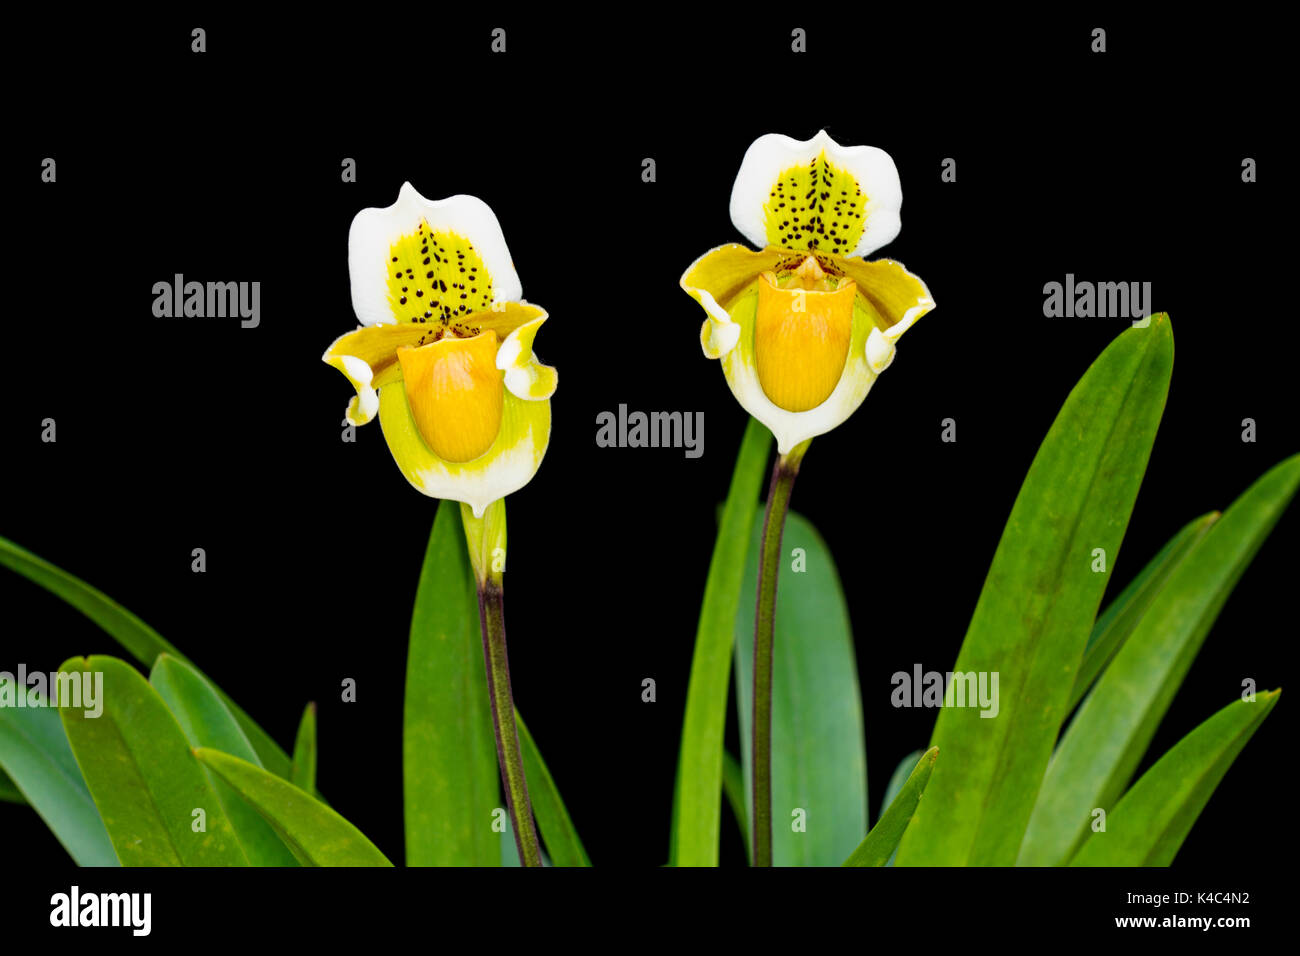 Paphiopedilum exul, Paphiopedilum orchid flowers with two  on  Black background. Stock Photo